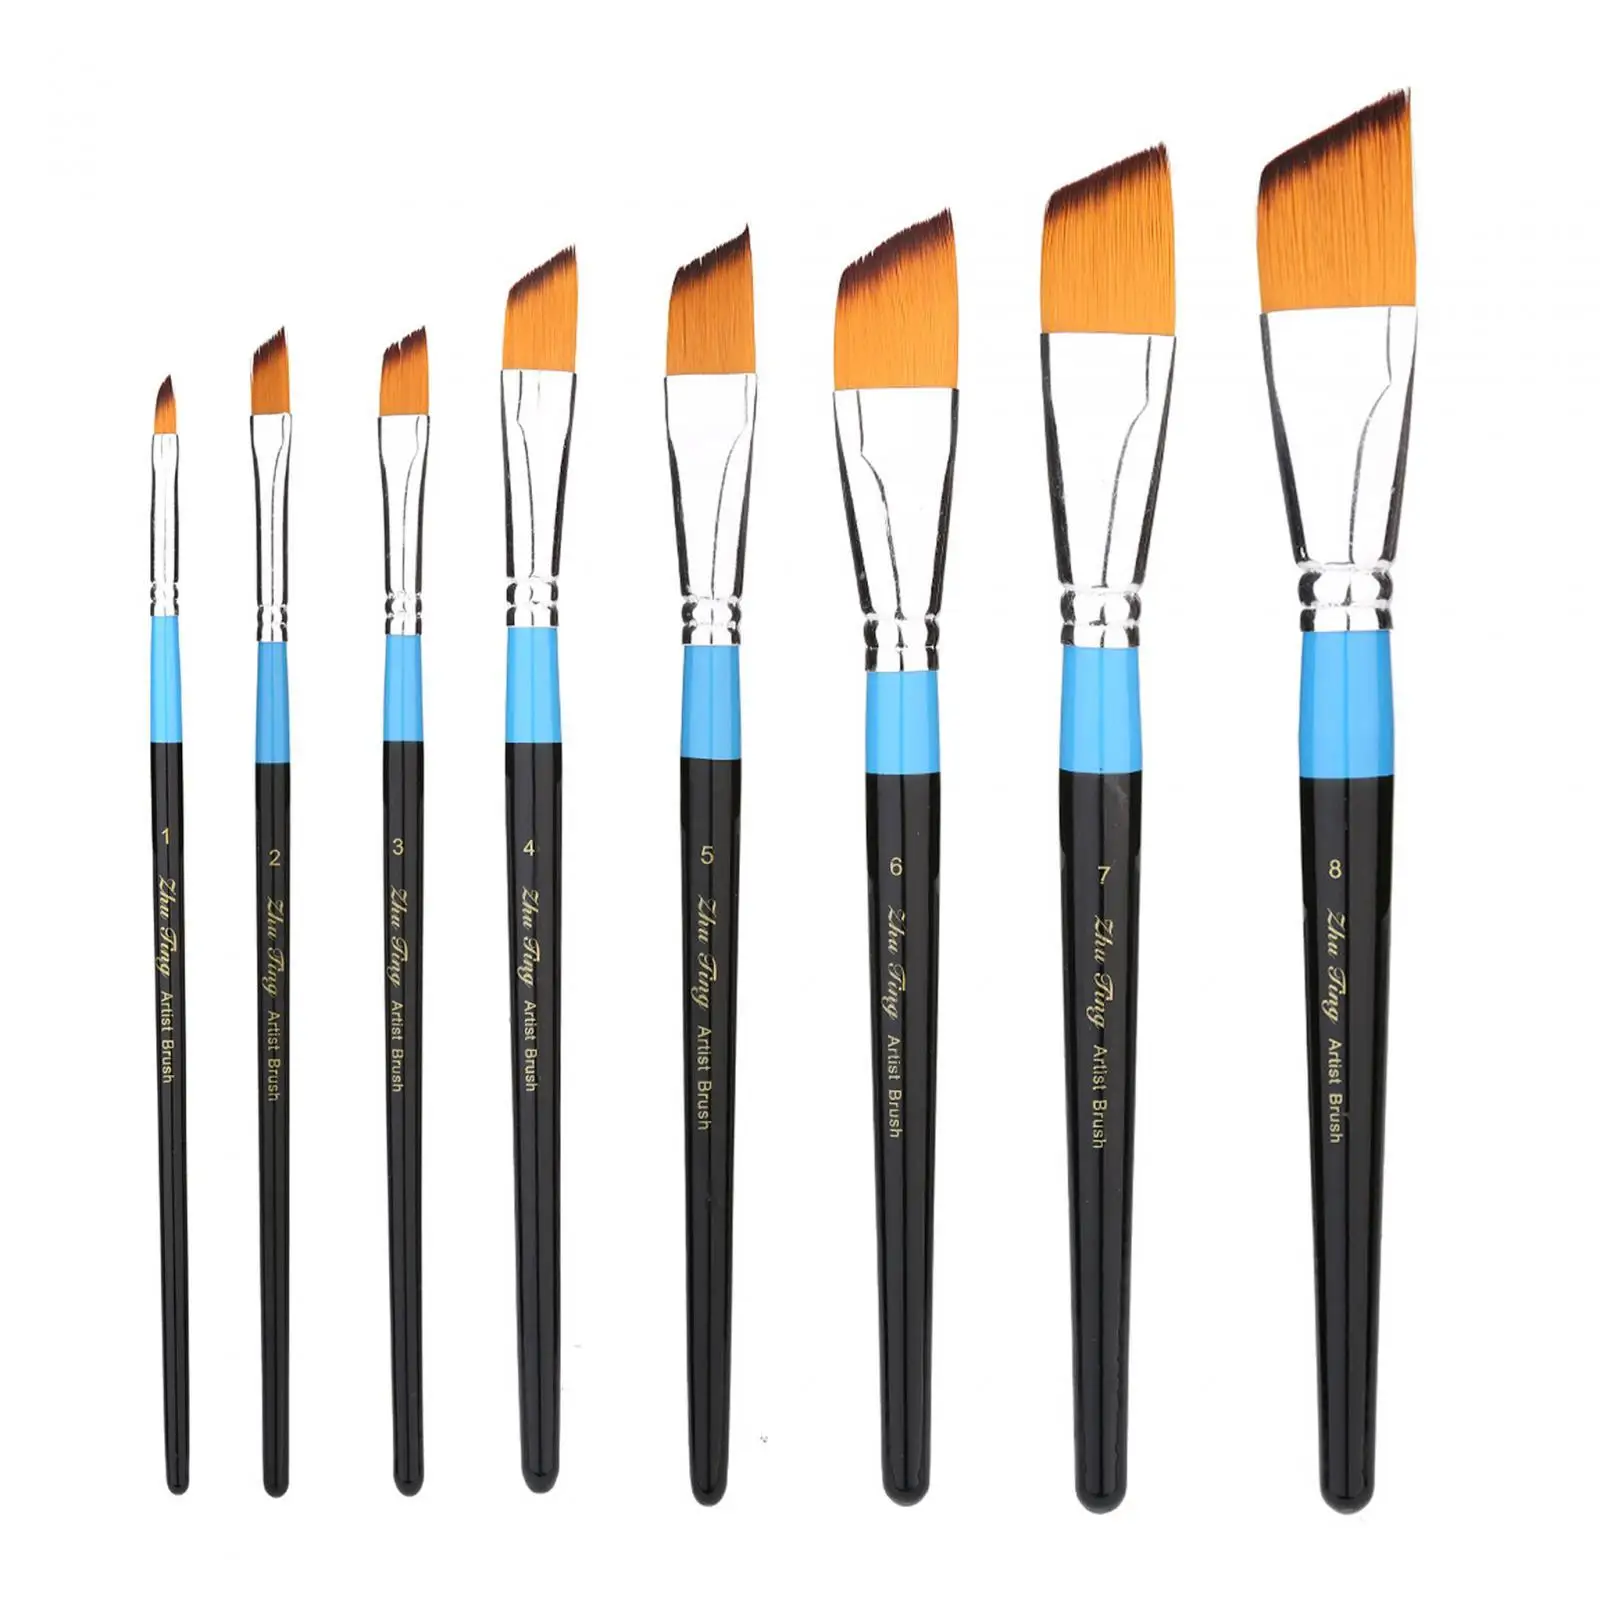 8x Paint Brush Set on Canvas, Wood, Face and Models Painting Brushes Set for Watercolor Oil Gouache Acrylic Painting Supplies